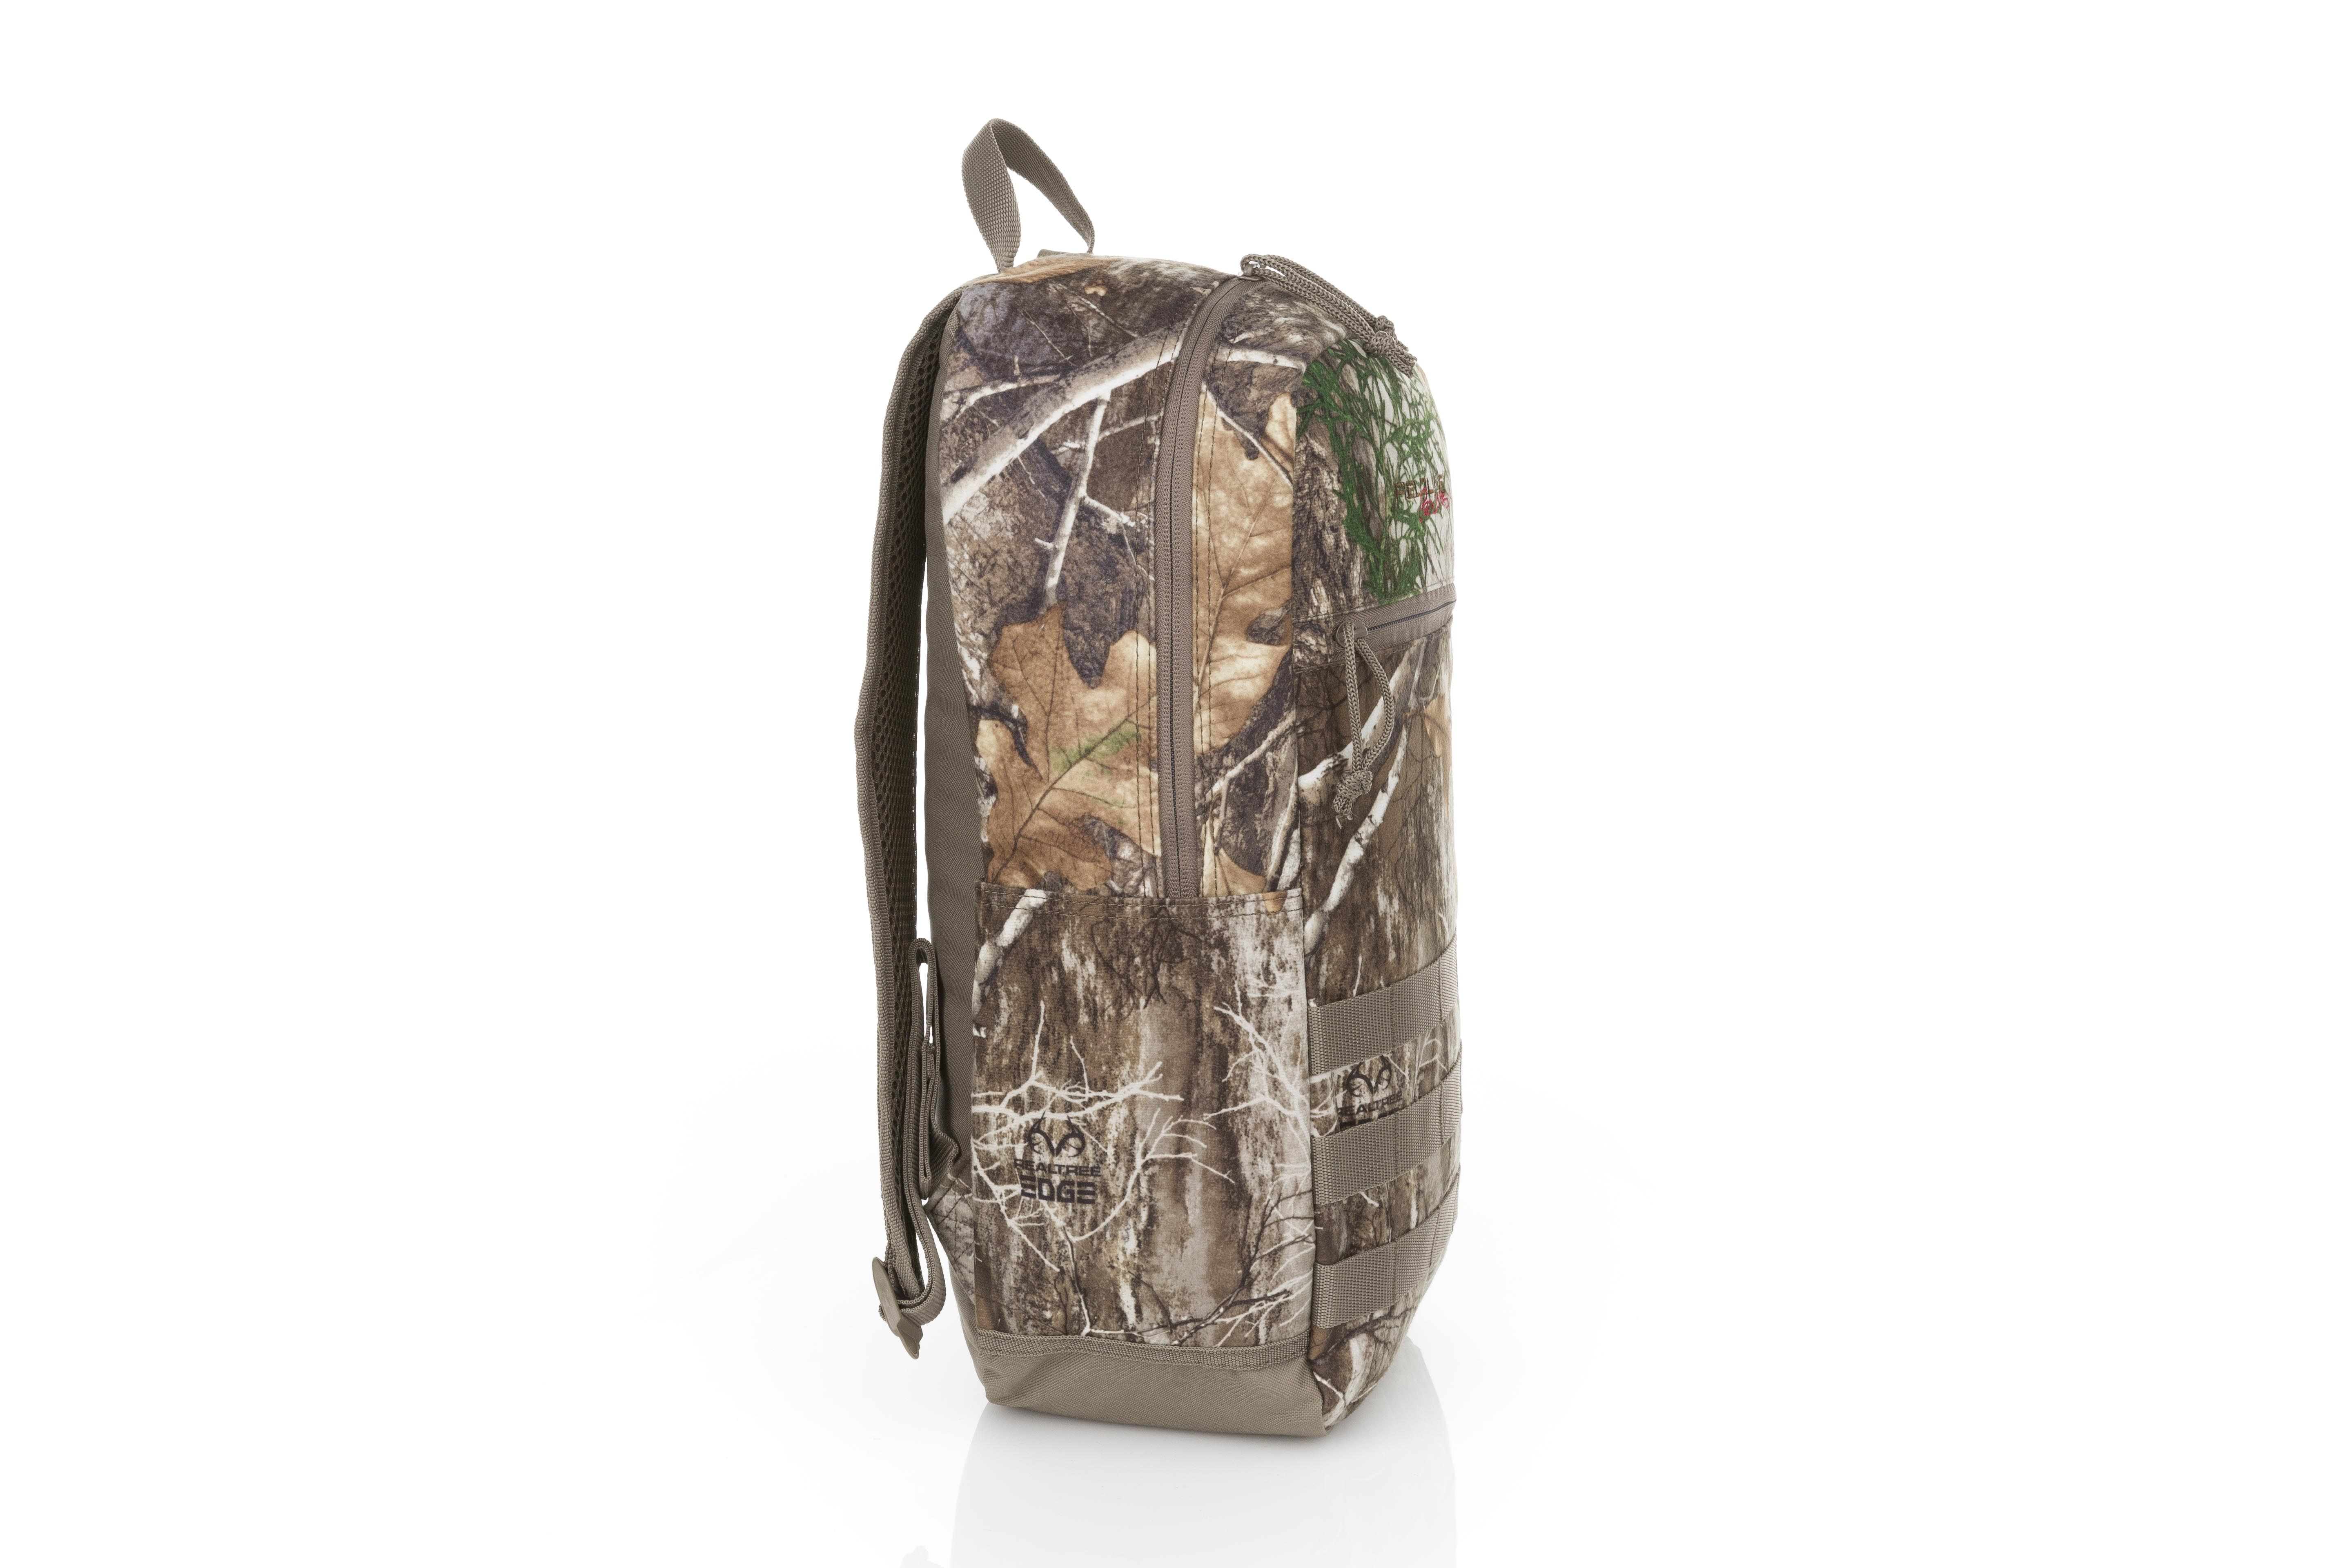 DAYSPROUT Rubber Landing Net Cover Green Digital Camo Boxes & Bags buy at